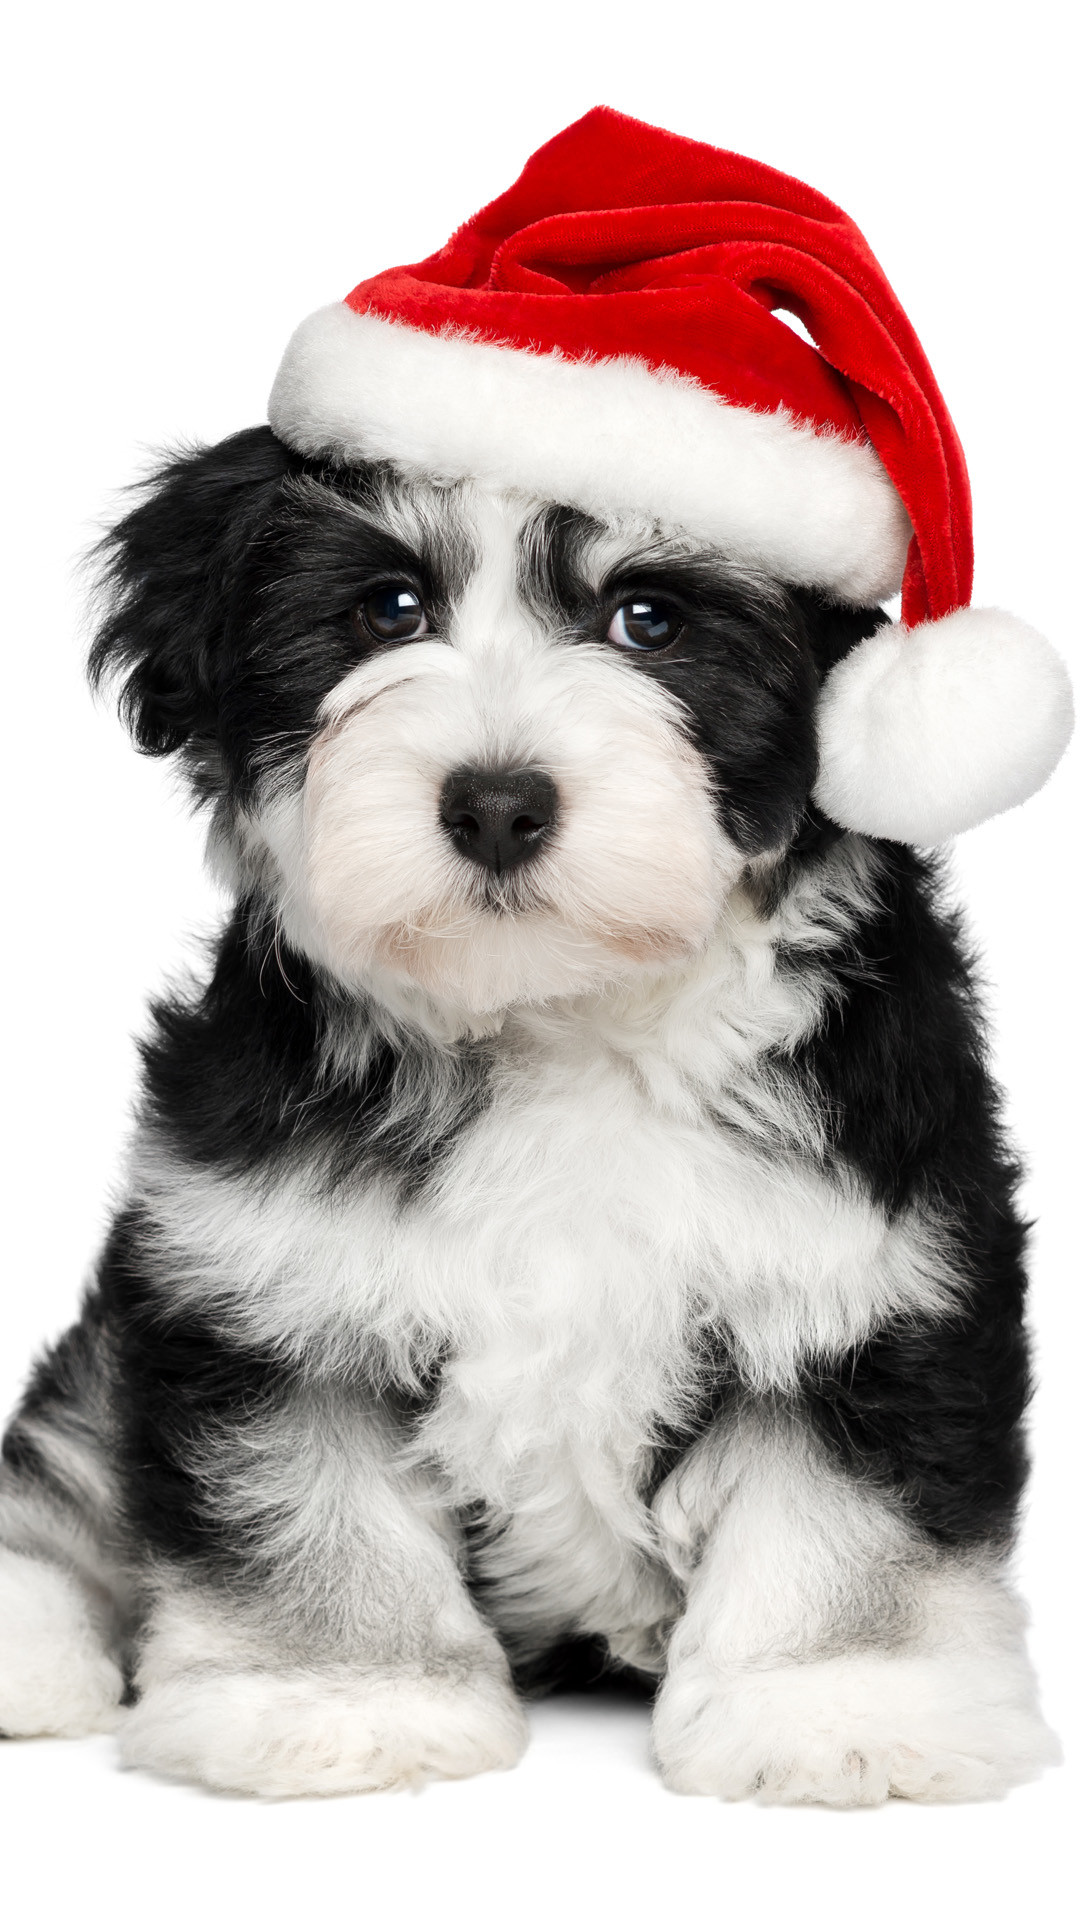 Christmas Puppy Wallpaper Image